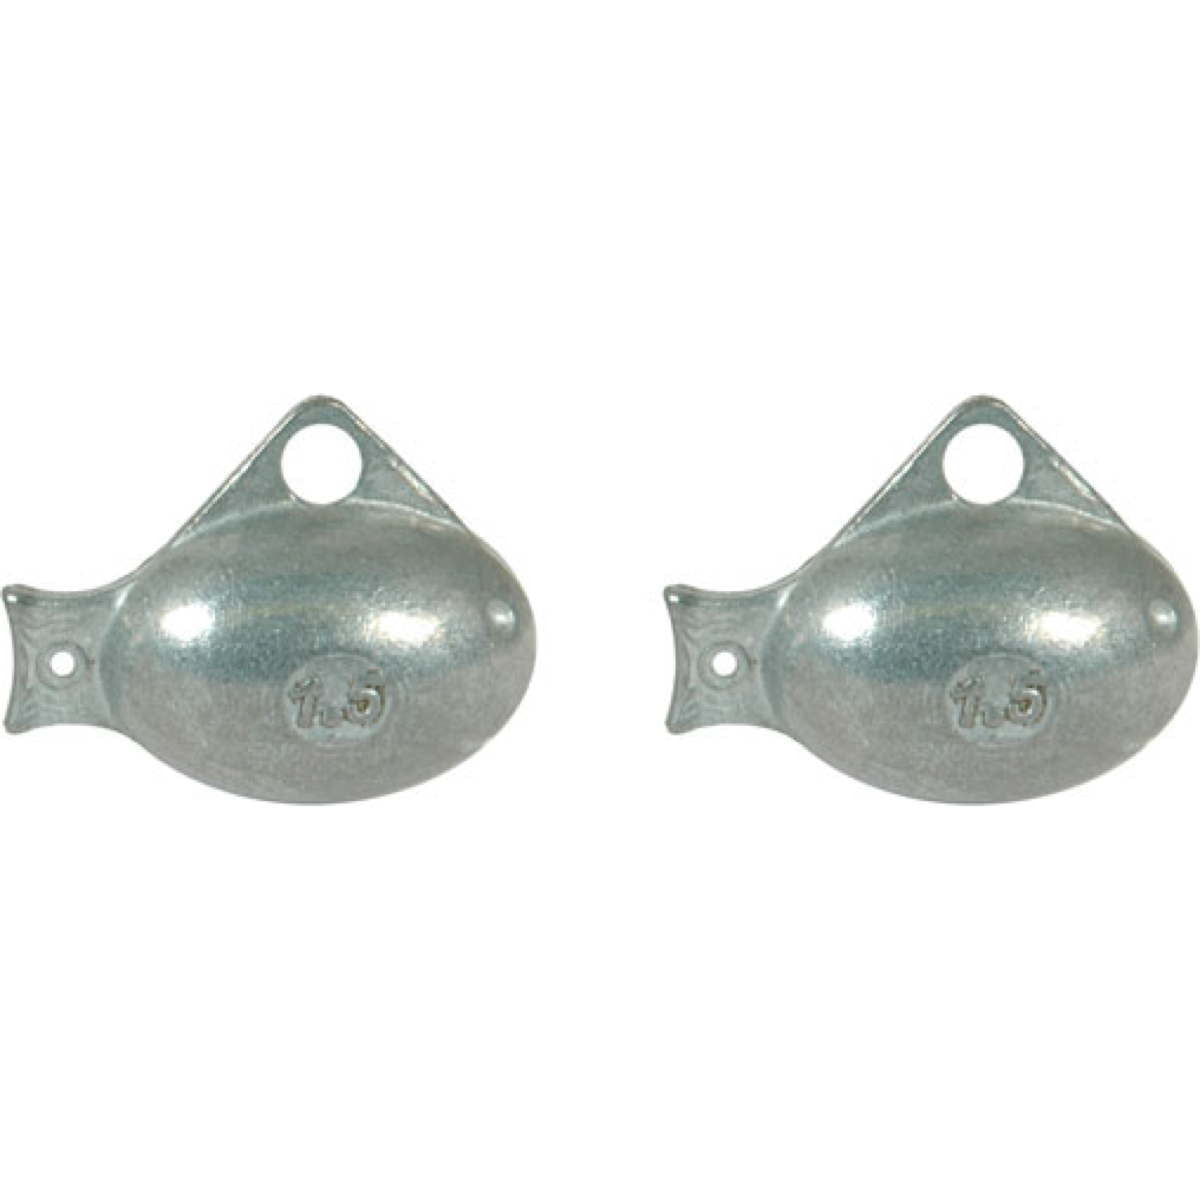 Photo of Off Shore Tackle Replacement Guppy Weights for sale at United Tackle Shops.